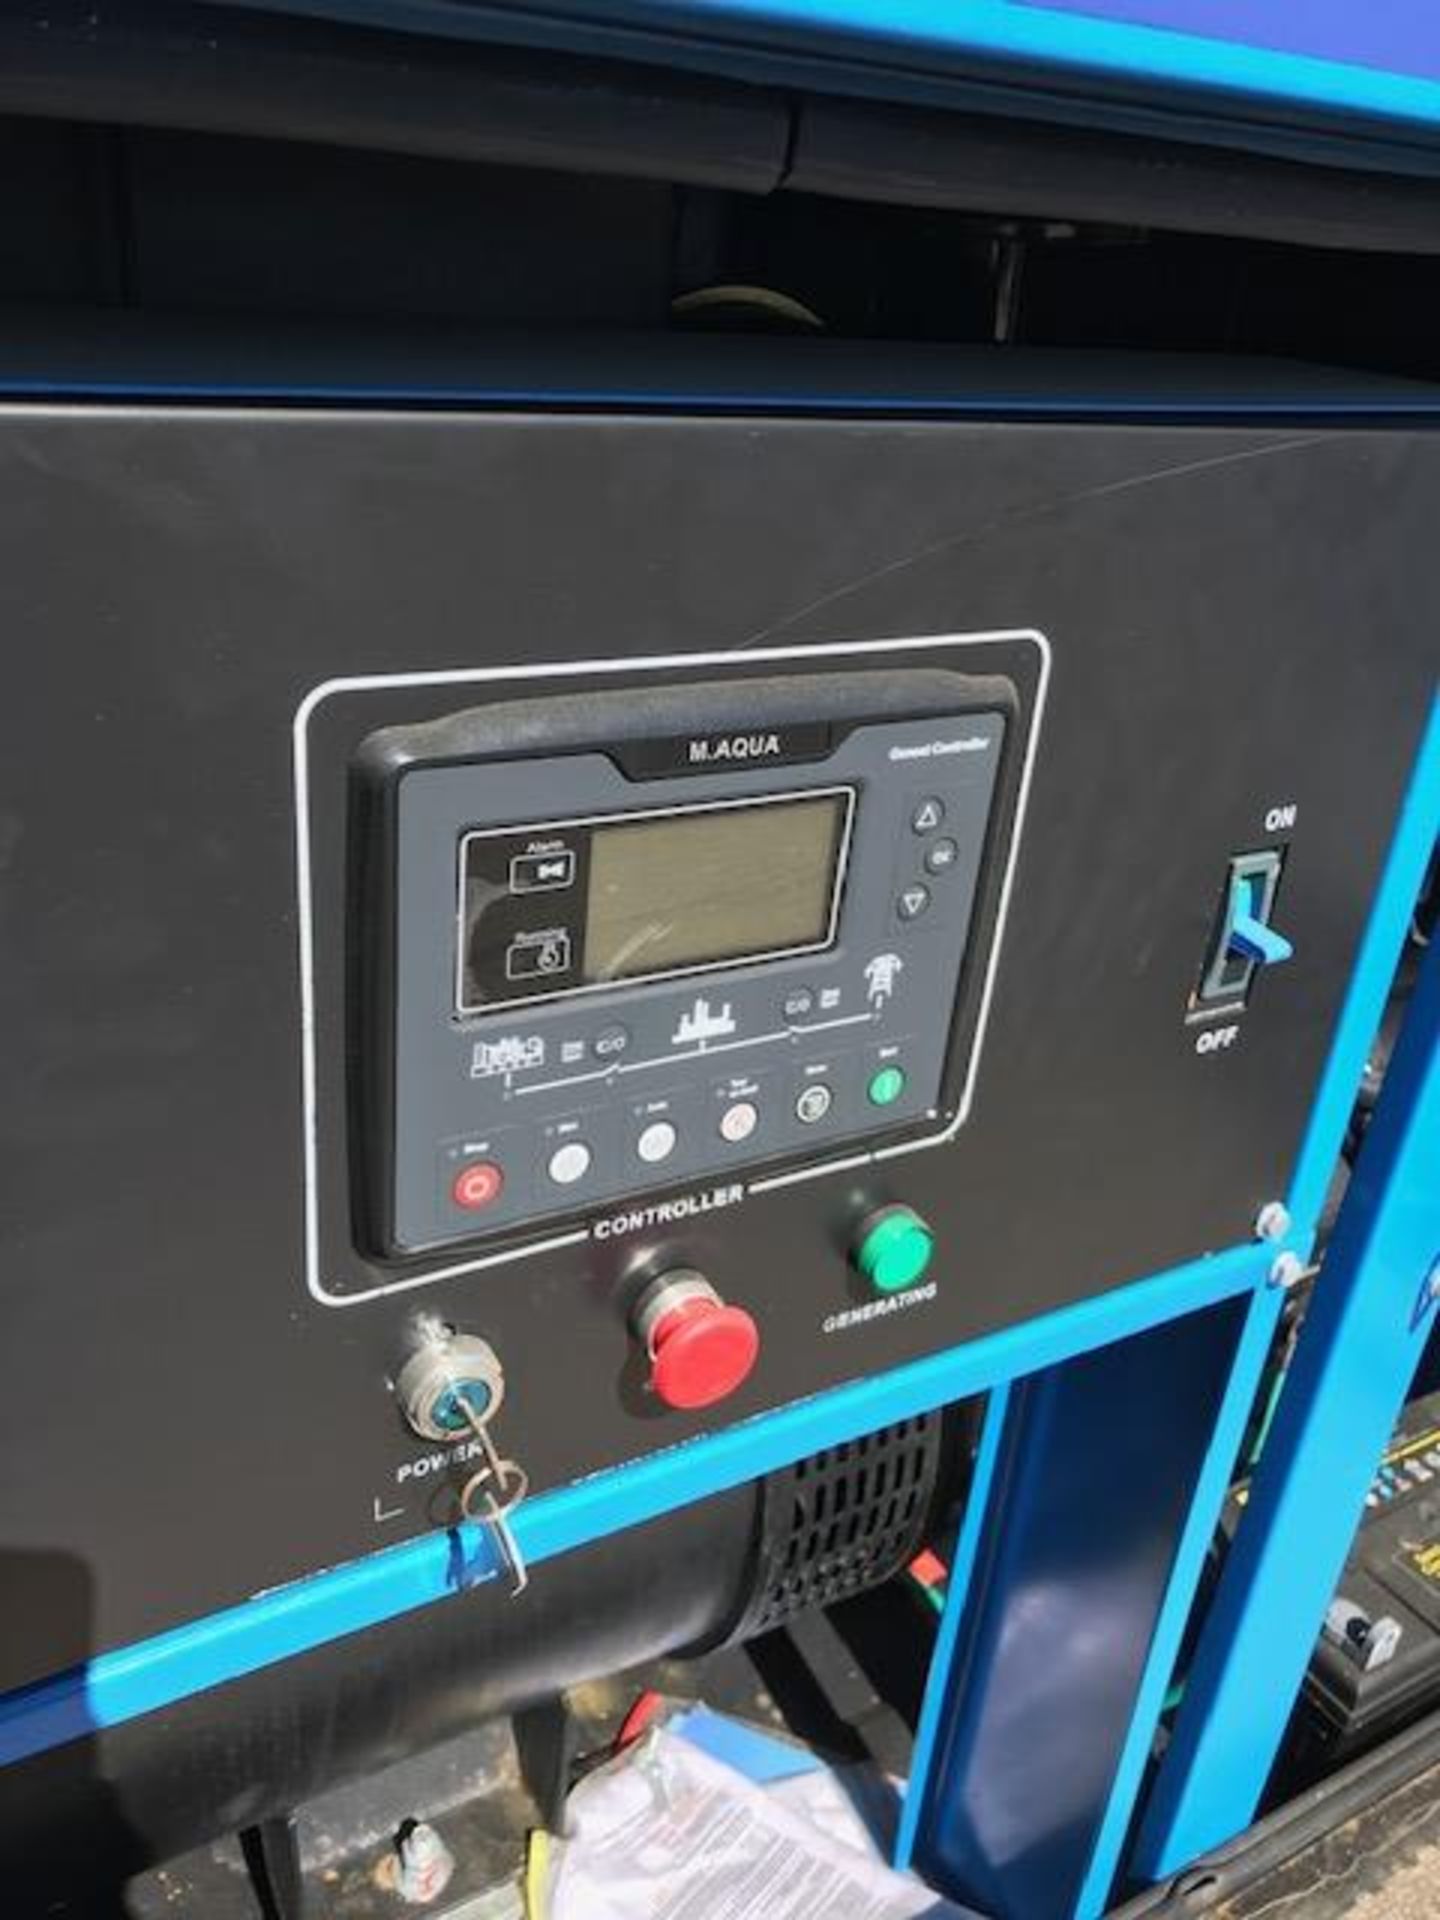 2019 Unissued 70 KVA Diesel Generator 3 Phase and Single Phase 50 Cps - Image 4 of 7